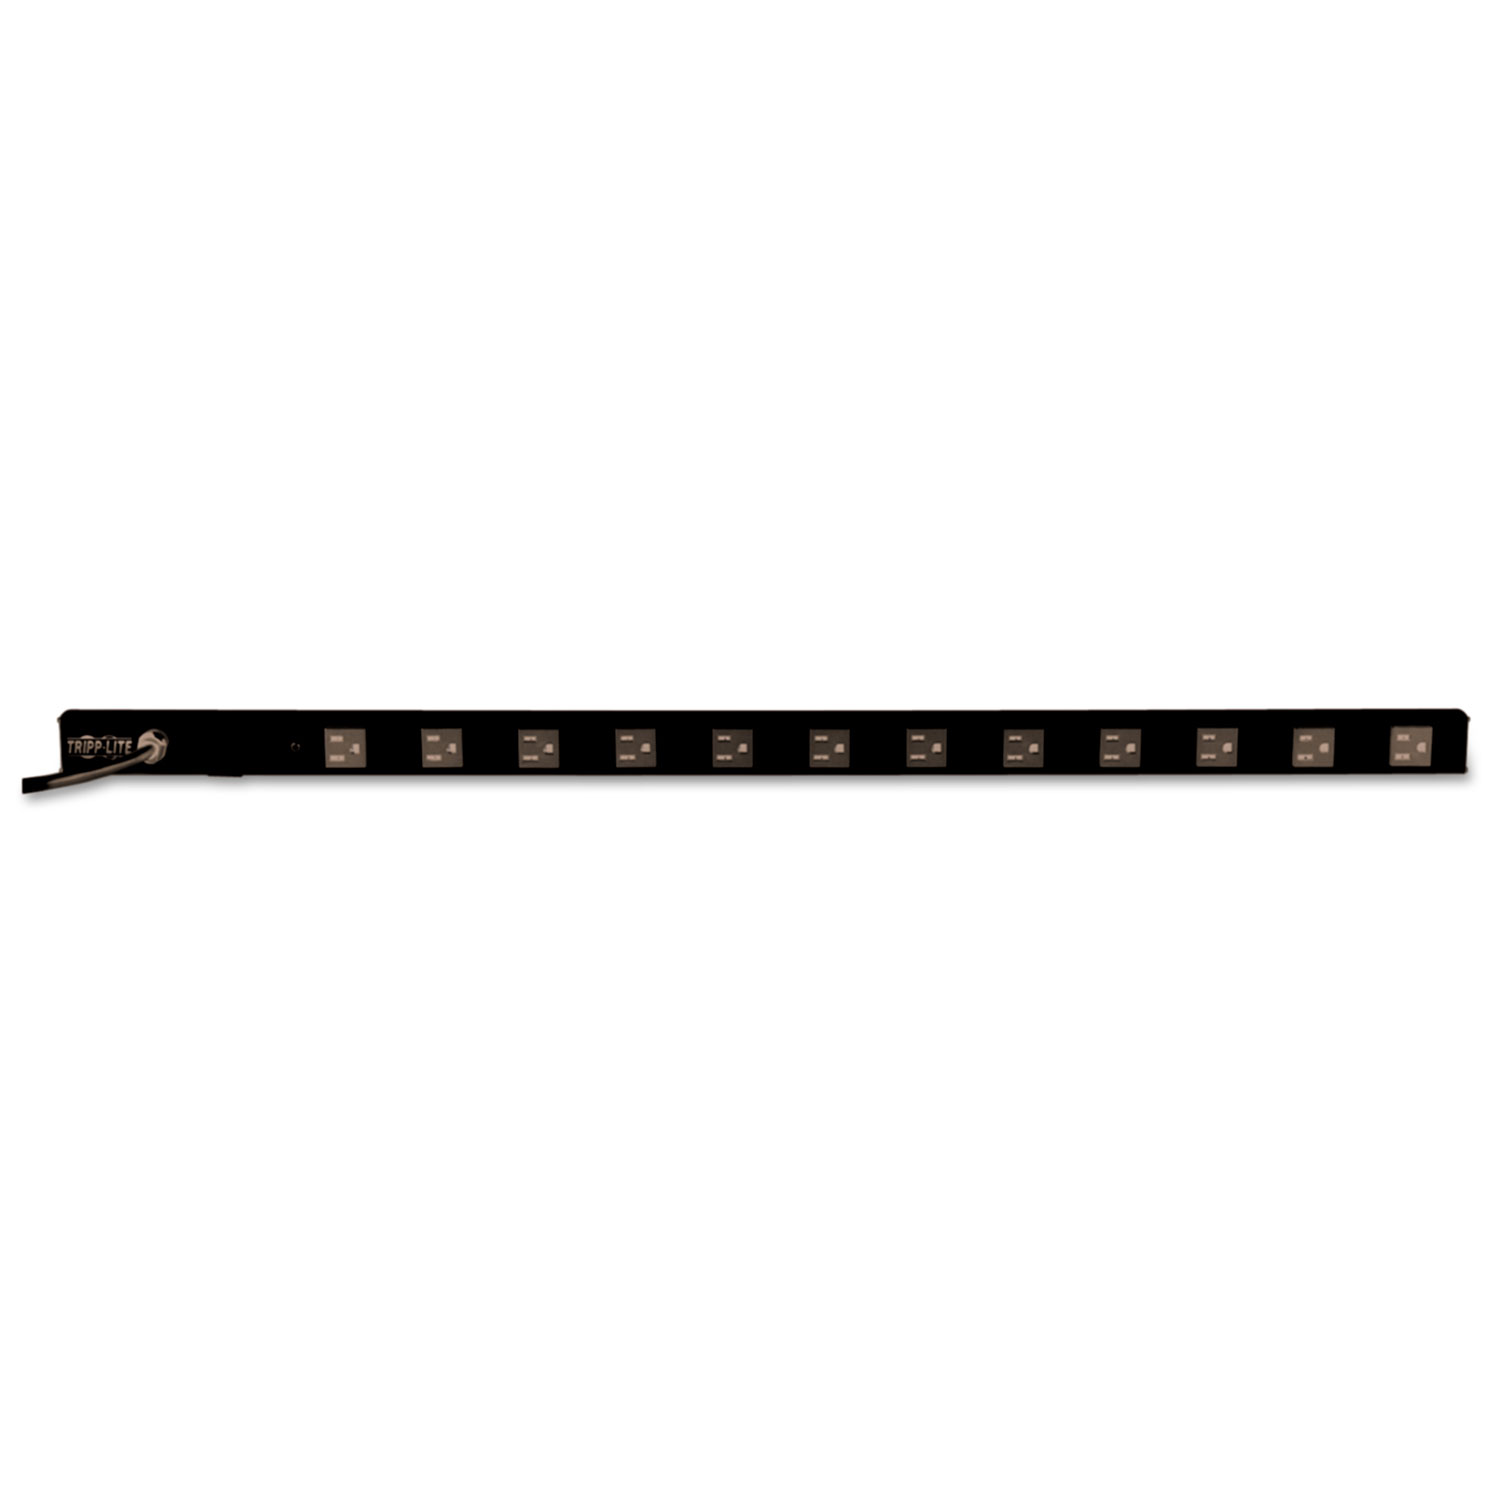 Vertical Power Strip, 12 Outlets, 1 1/4 x 36 x 1 1/2, 6 ft Cord, Silver